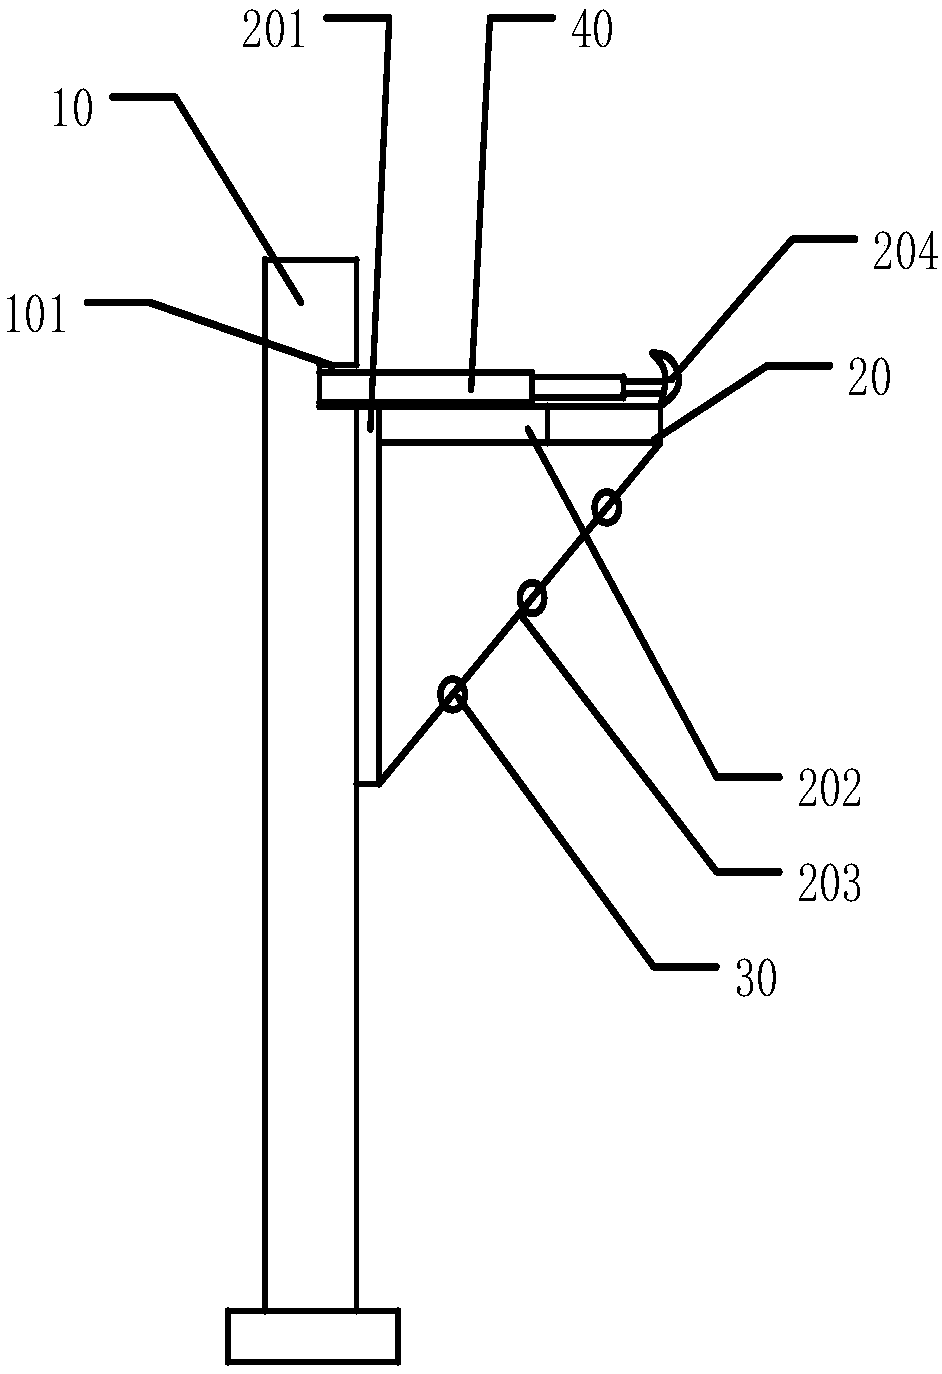 Closed-circuit monitoring system with vehicle speed feedback function